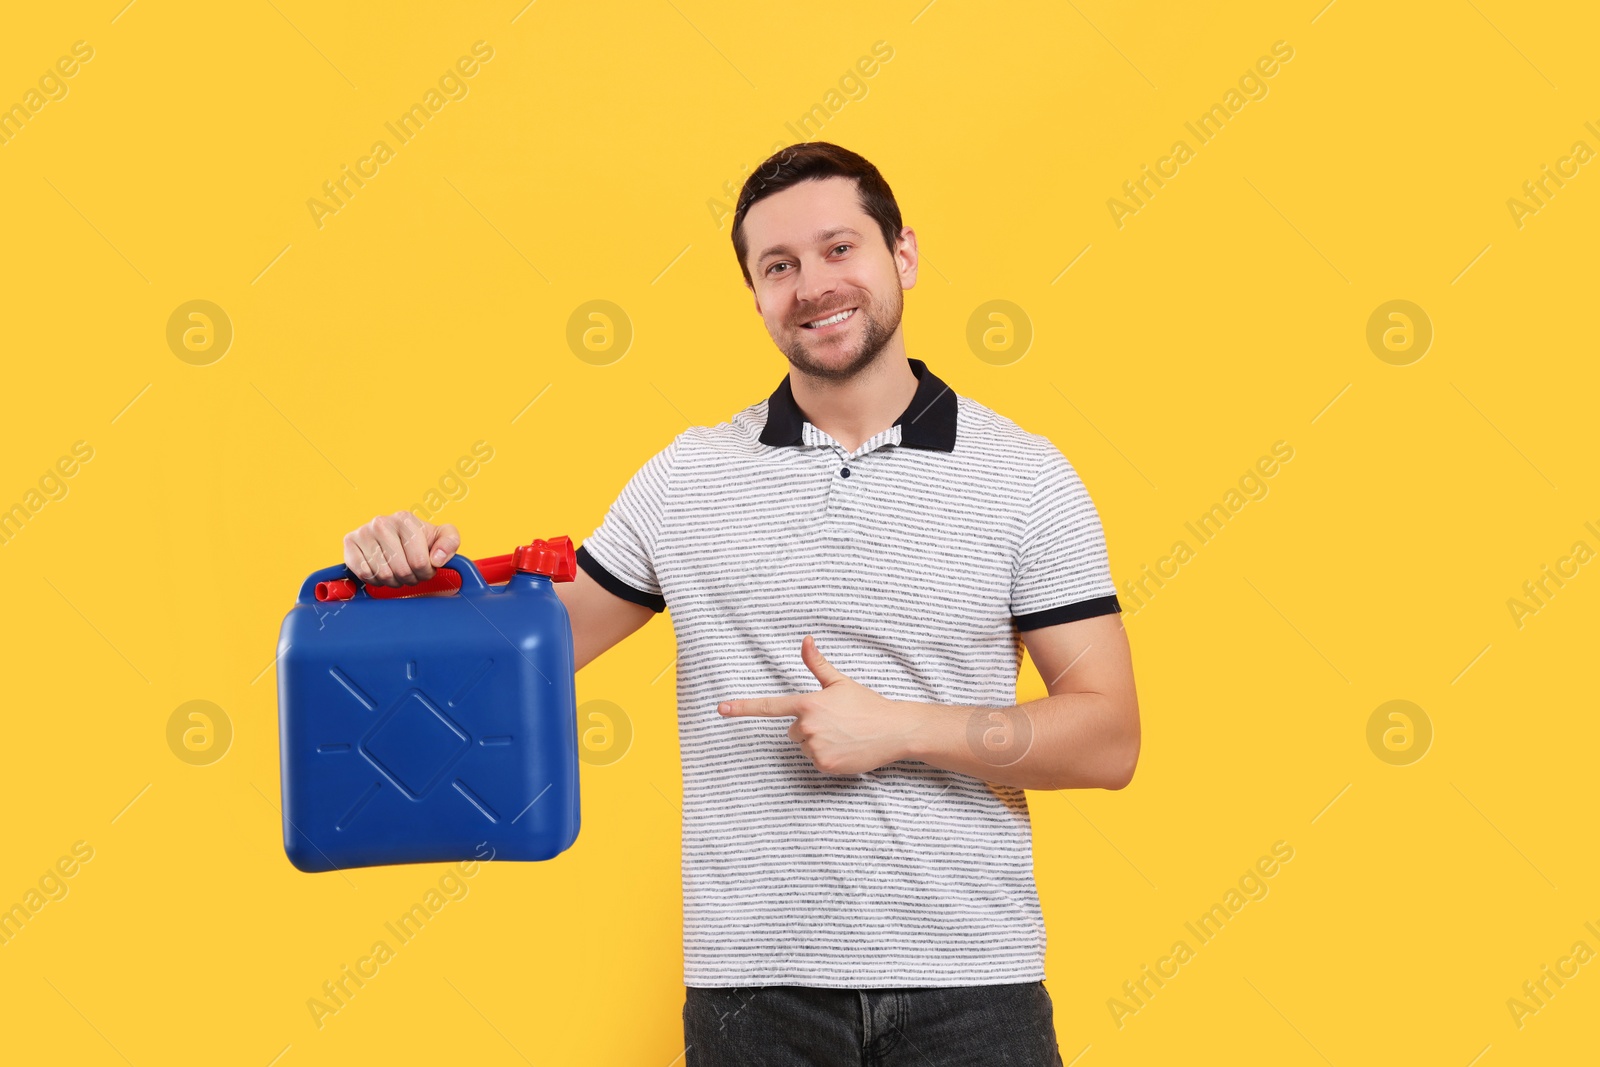 Photo of Man pointing at blue canister on orange background